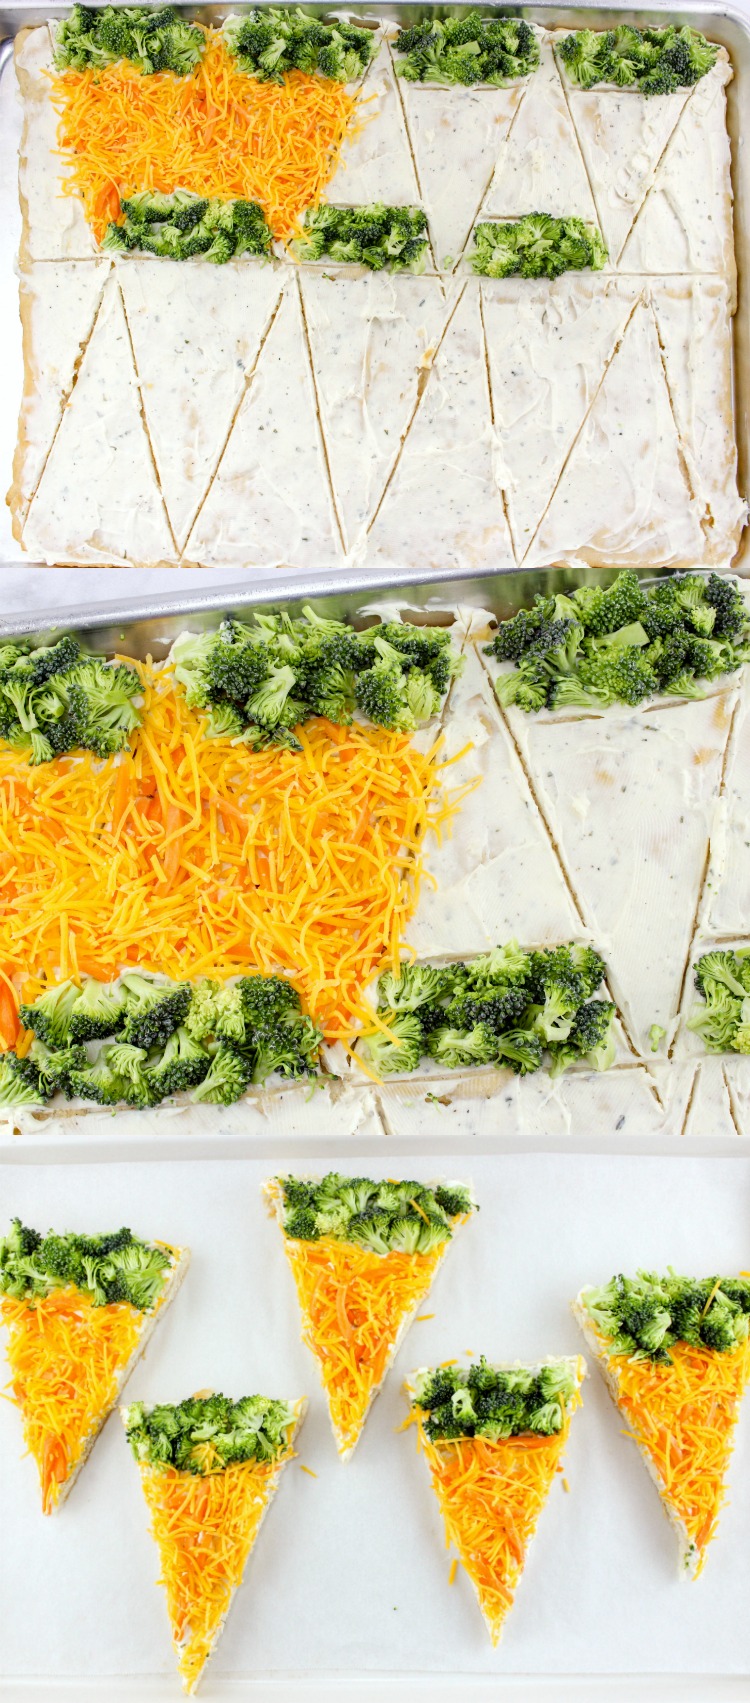 Carrot Vegetable Pizza Recipe with an Easter twist! Chopped veggies with a Crescent Roll crust make these veggie bars a fun Easter appetizer or brunch menu item. | OHMY-CREATIVE.COM |  #carrotappetizer #sidedishrecipe #crescentrollrecipe  #Easterrecipe #Easter #easterbrunch #veggiebars #vegetablepizza